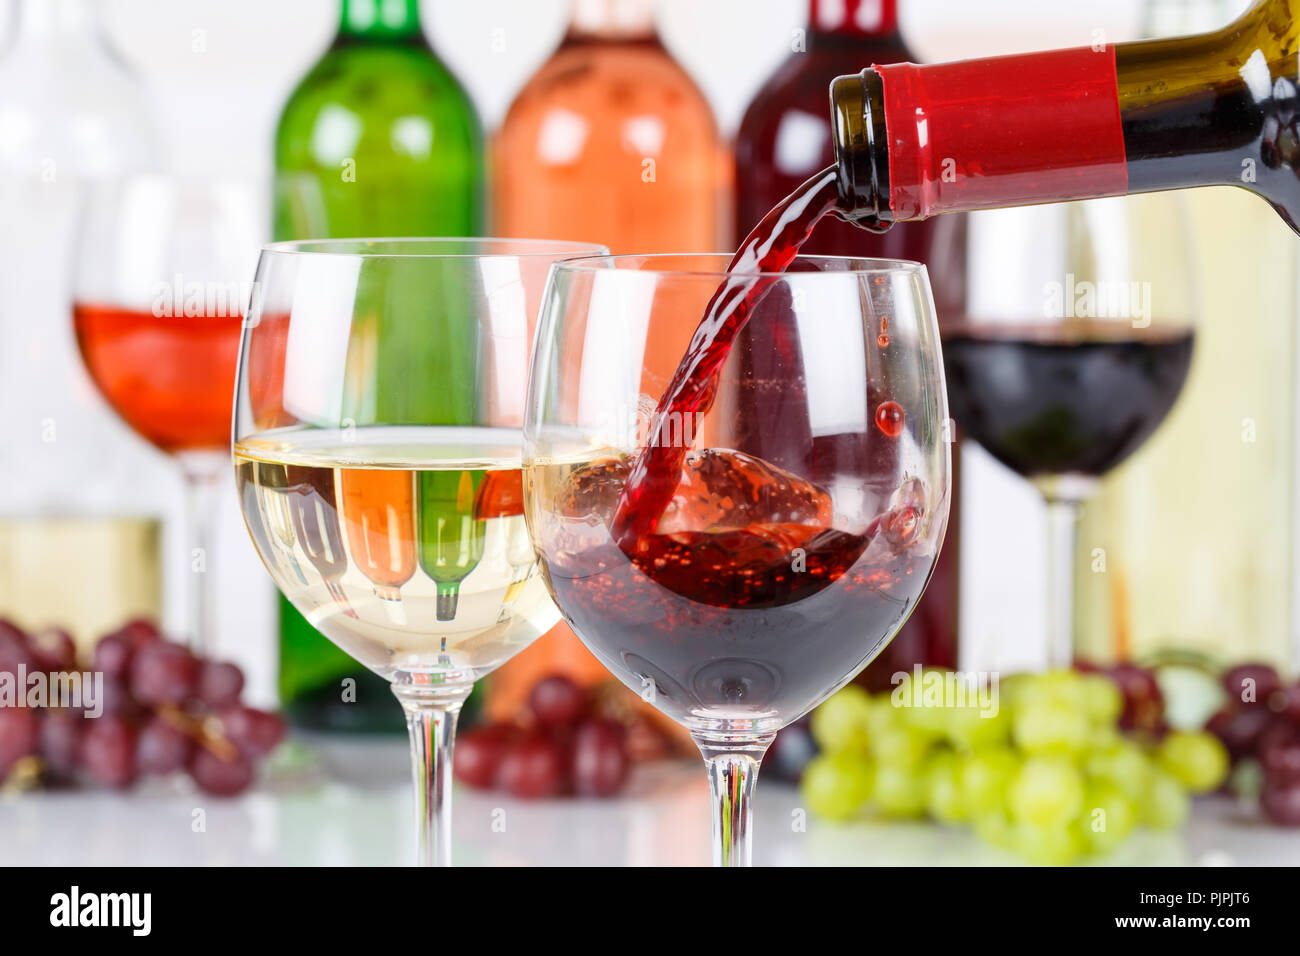 Wine pouring glass bottle red pour alcohol Stock Photo